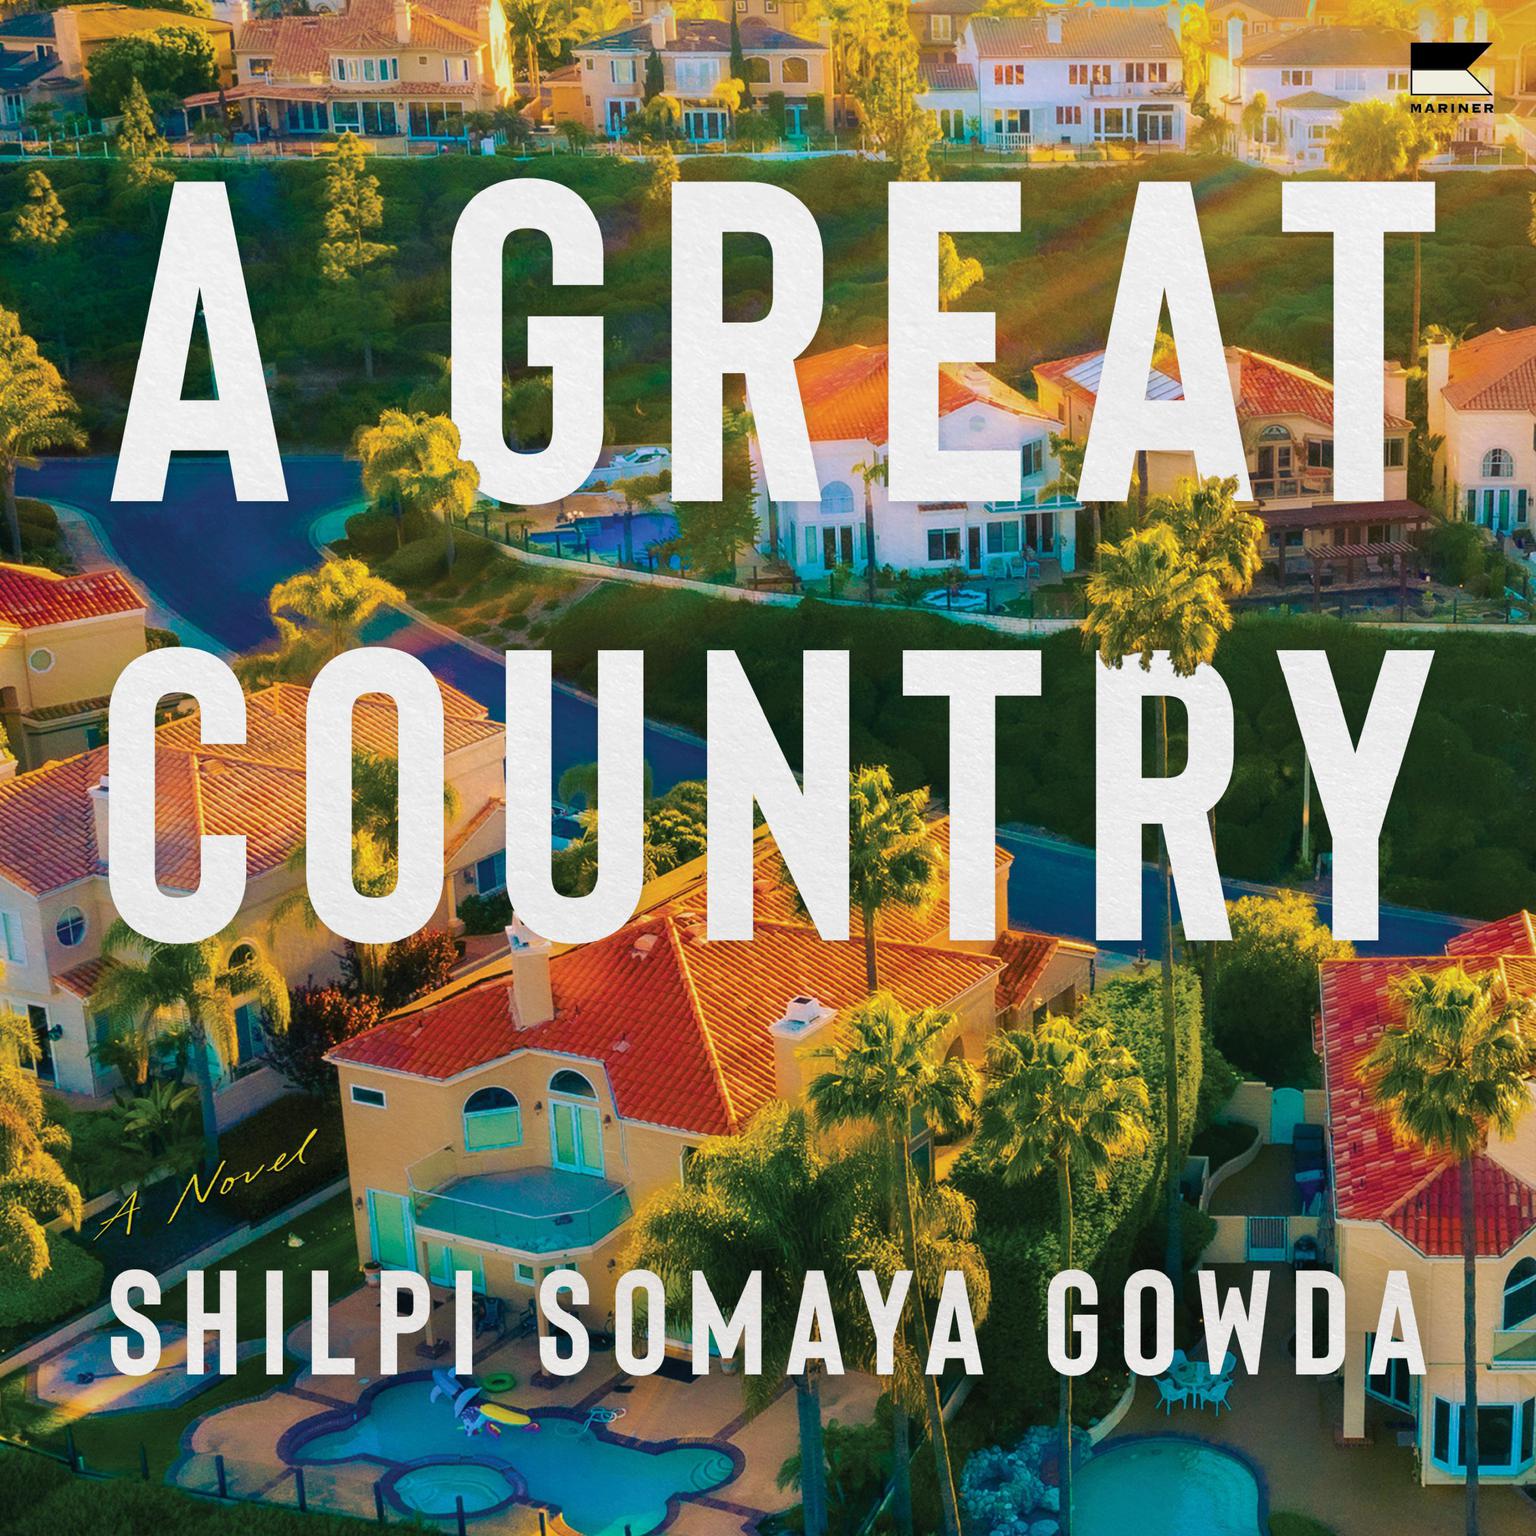 A Great Country: A Novel Audiobook, by Shilpi Somaya Gowda